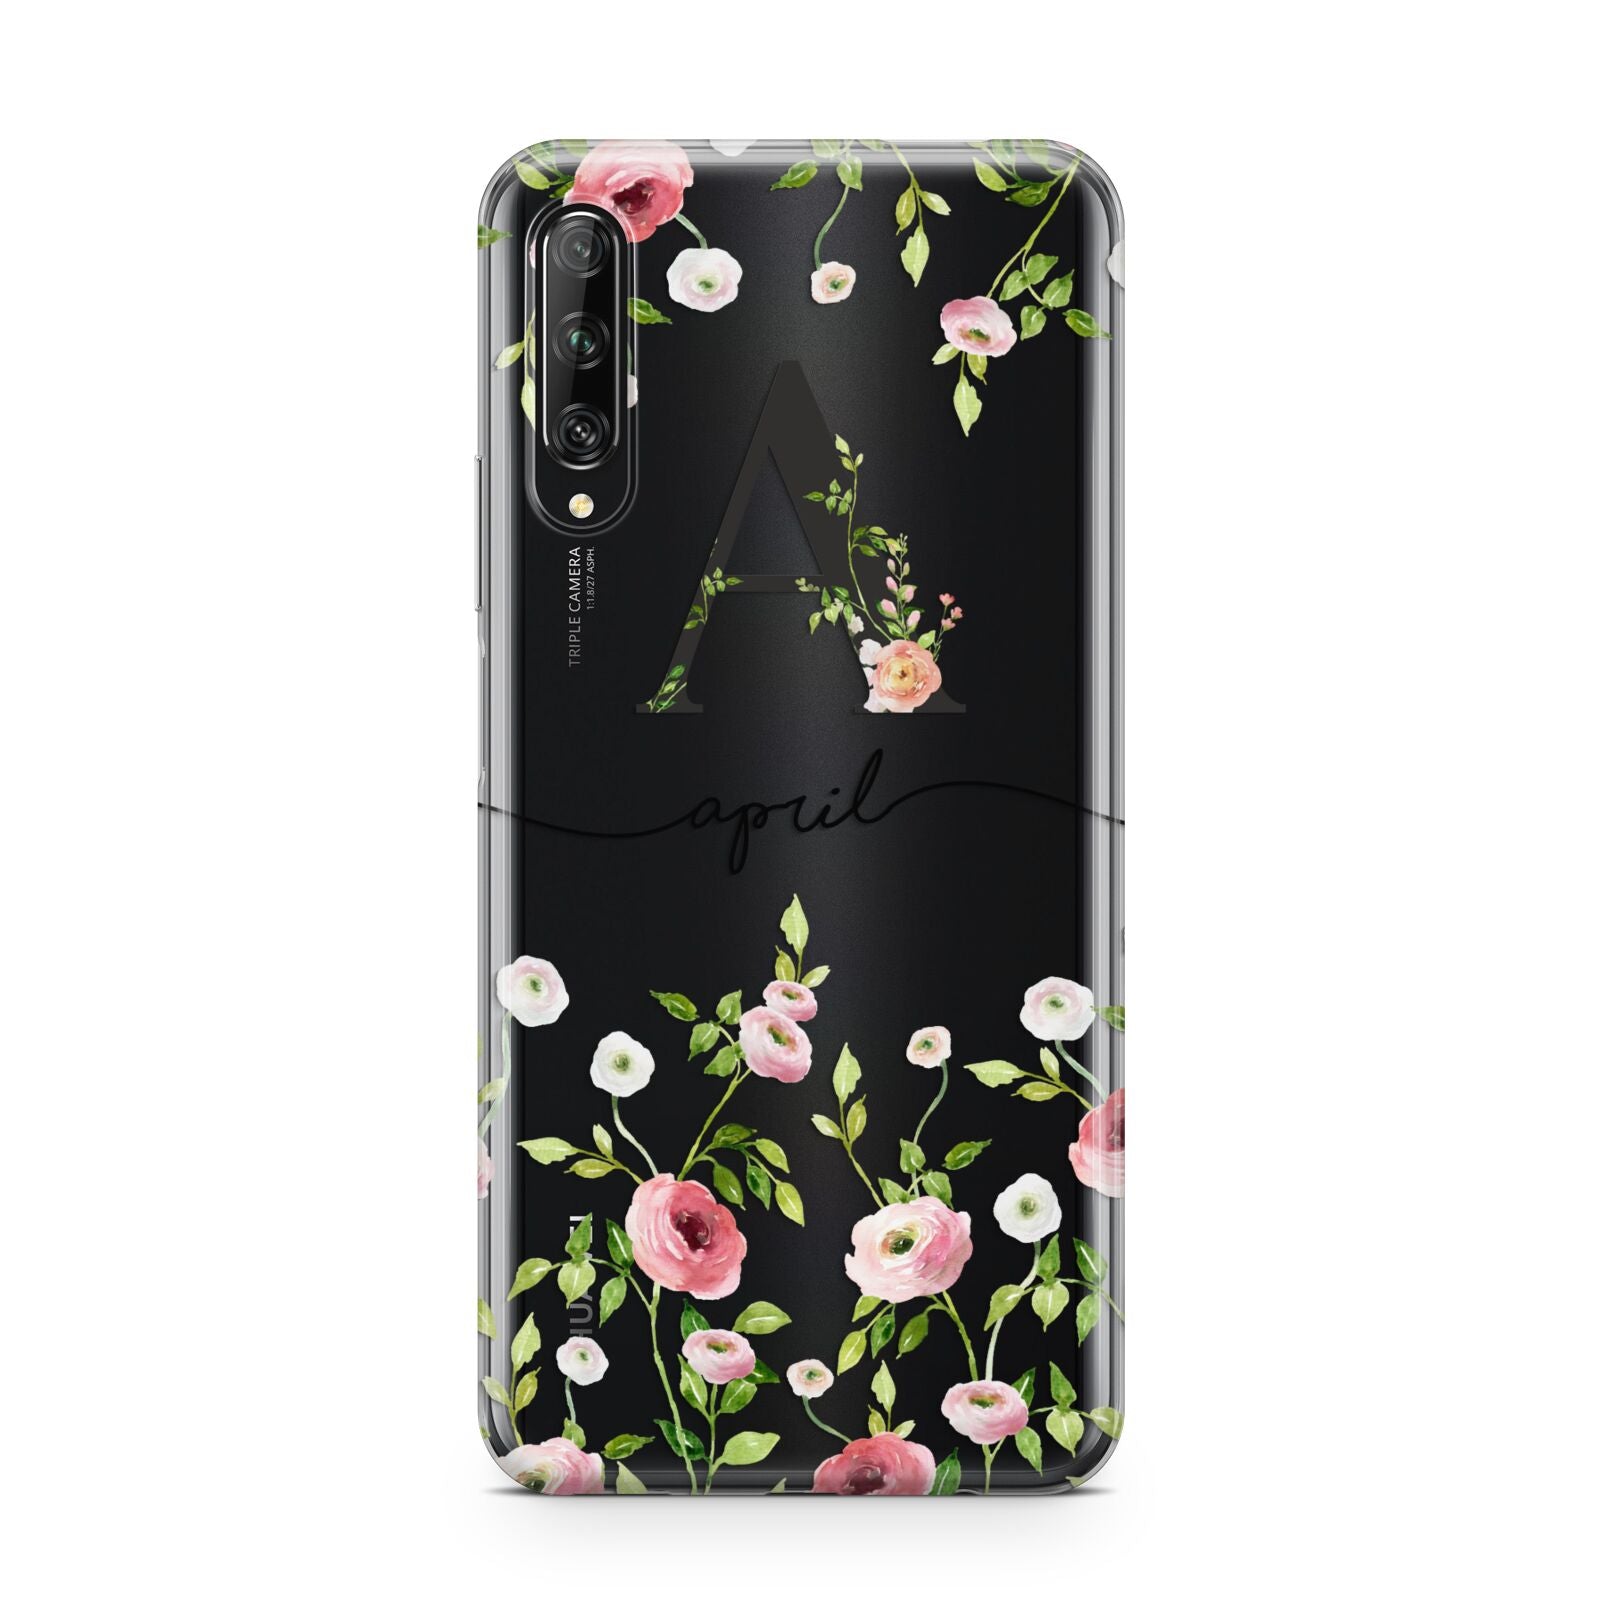 Personalised Floral Initial Huawei P Smart Pro 2019